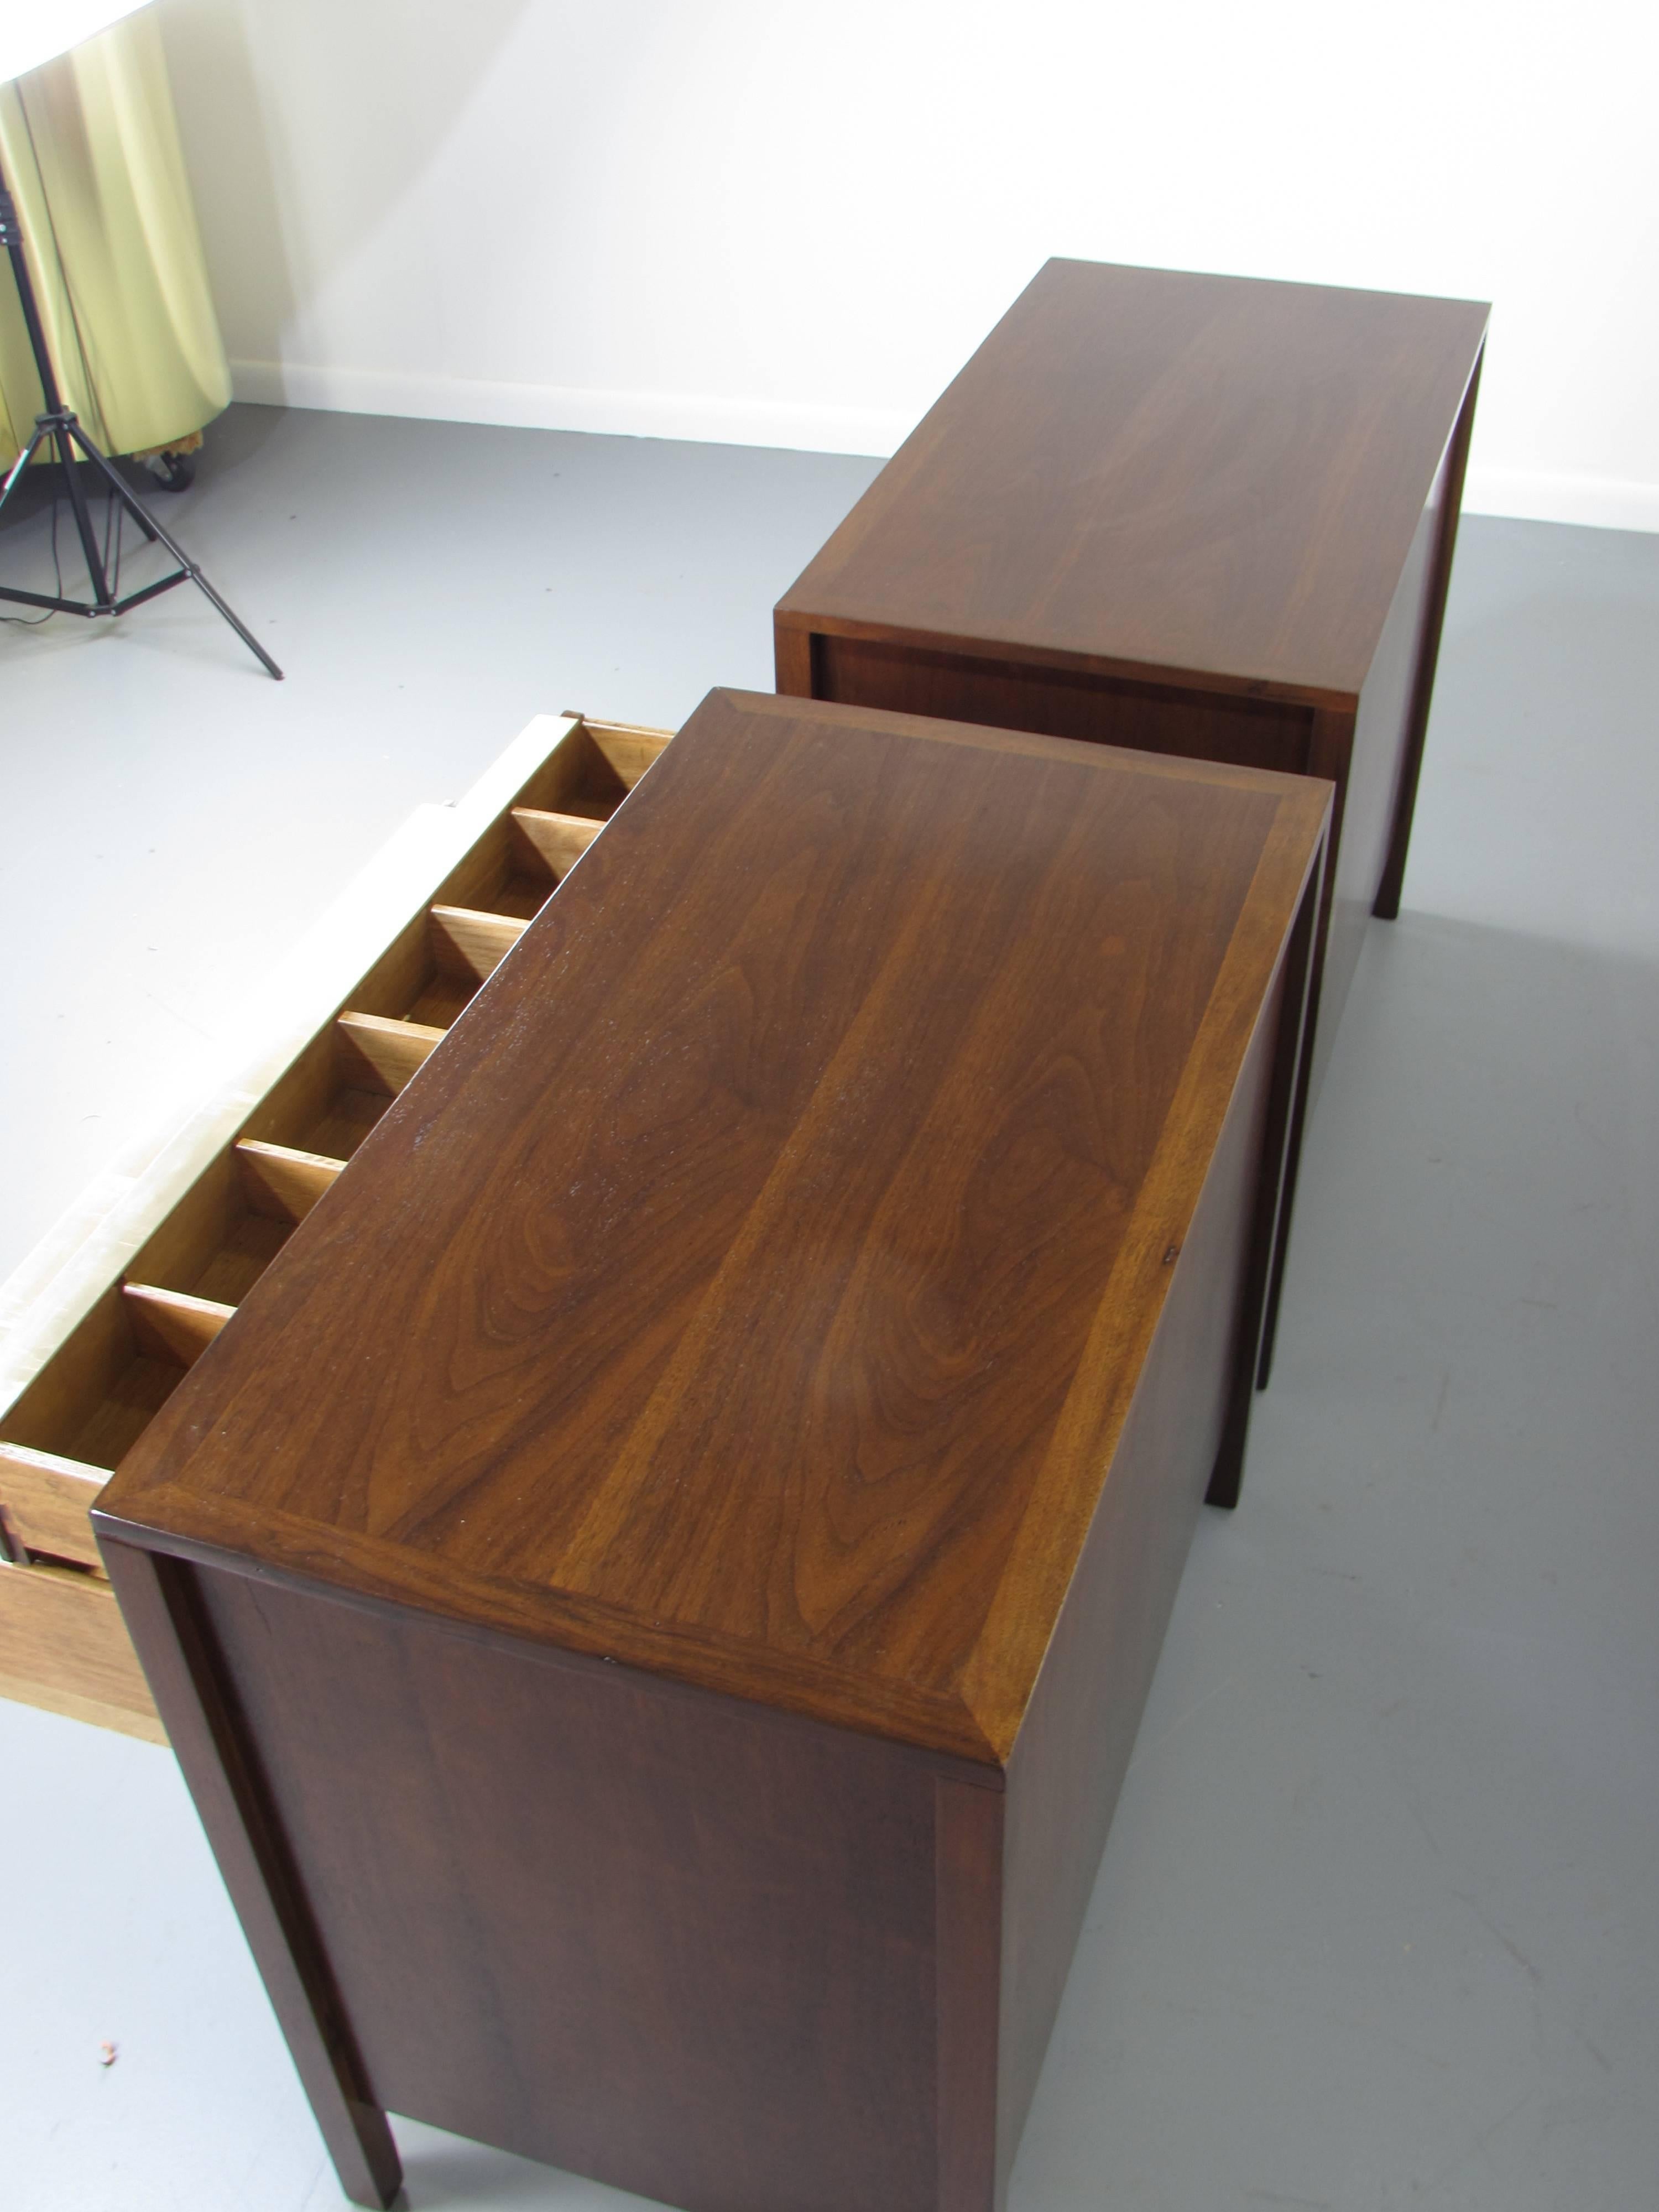 American Pair of Walnut and Aluminum Dressers by William Pahlmann, 1952